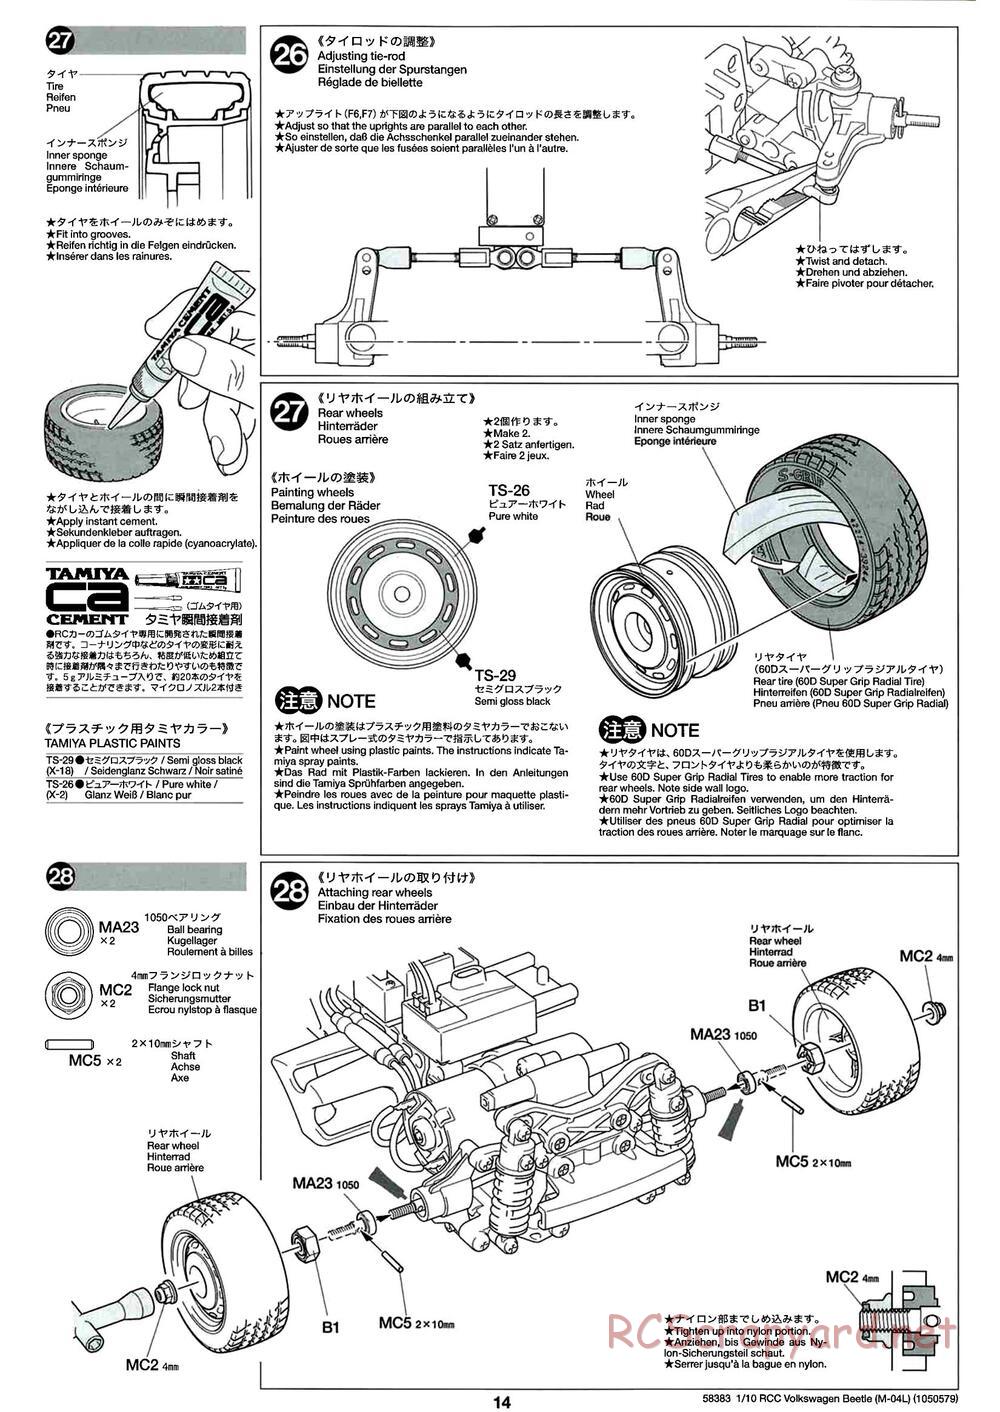 Tamiya - Volkswagen Beetle - M04L Chassis - Manual - Page 14